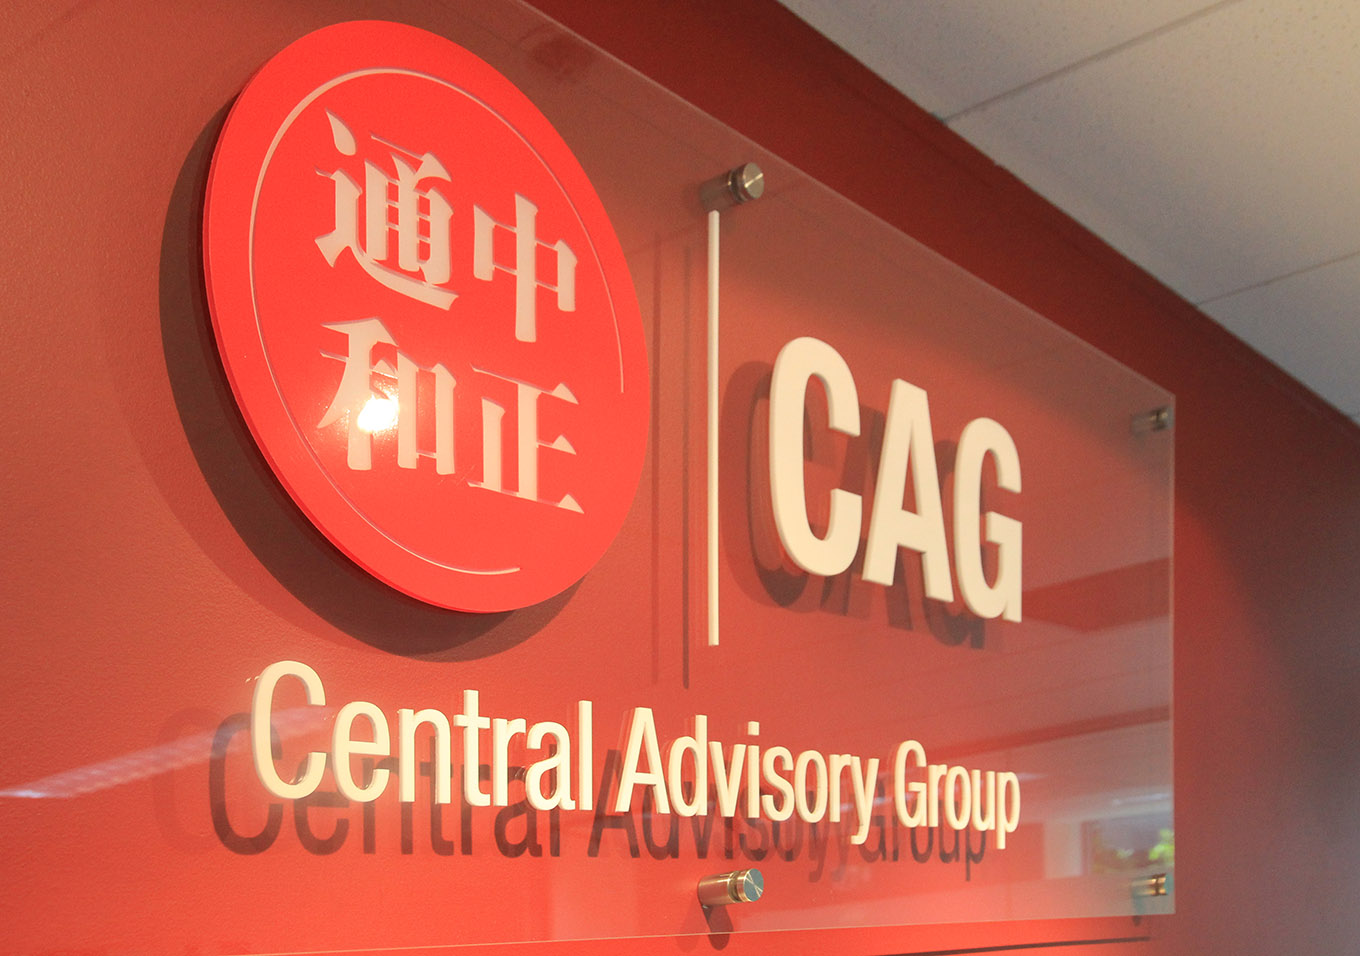 Central Advisory Group office 3D signage